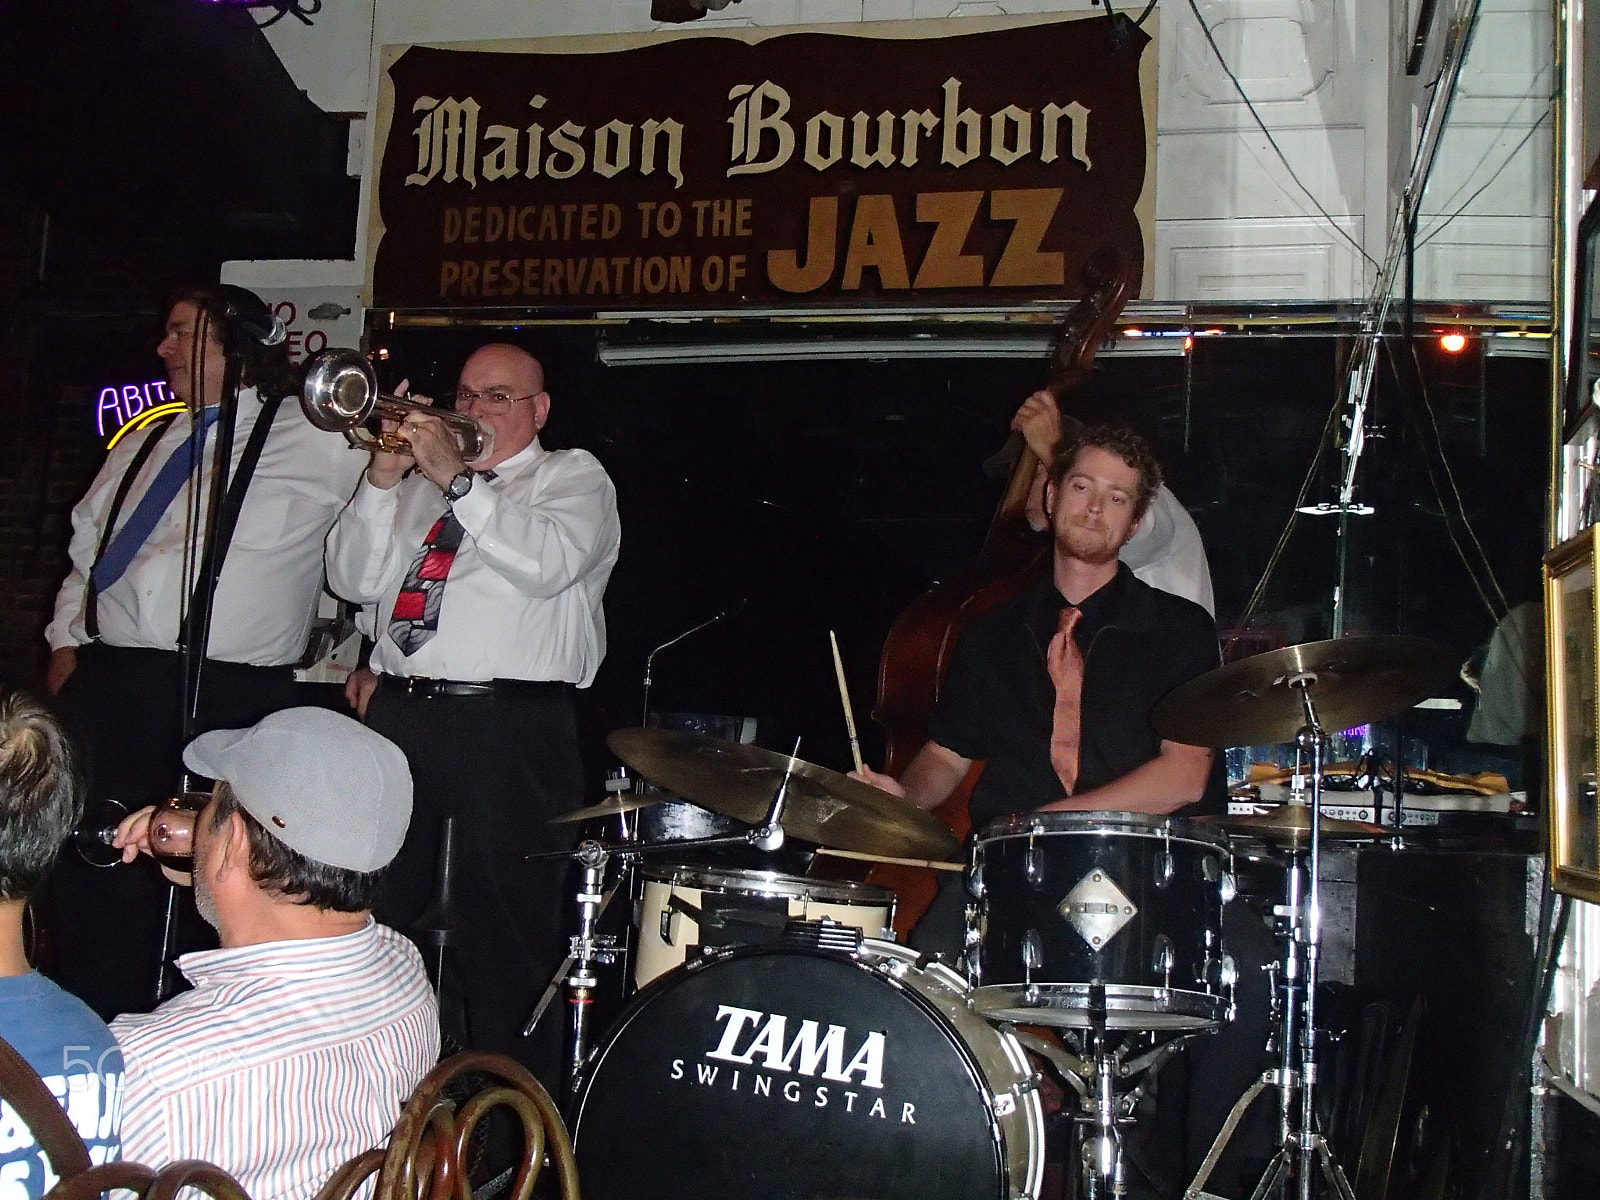 Olympus TG-820 sample photo. Jazzmen from bourbon street-new orleans photography